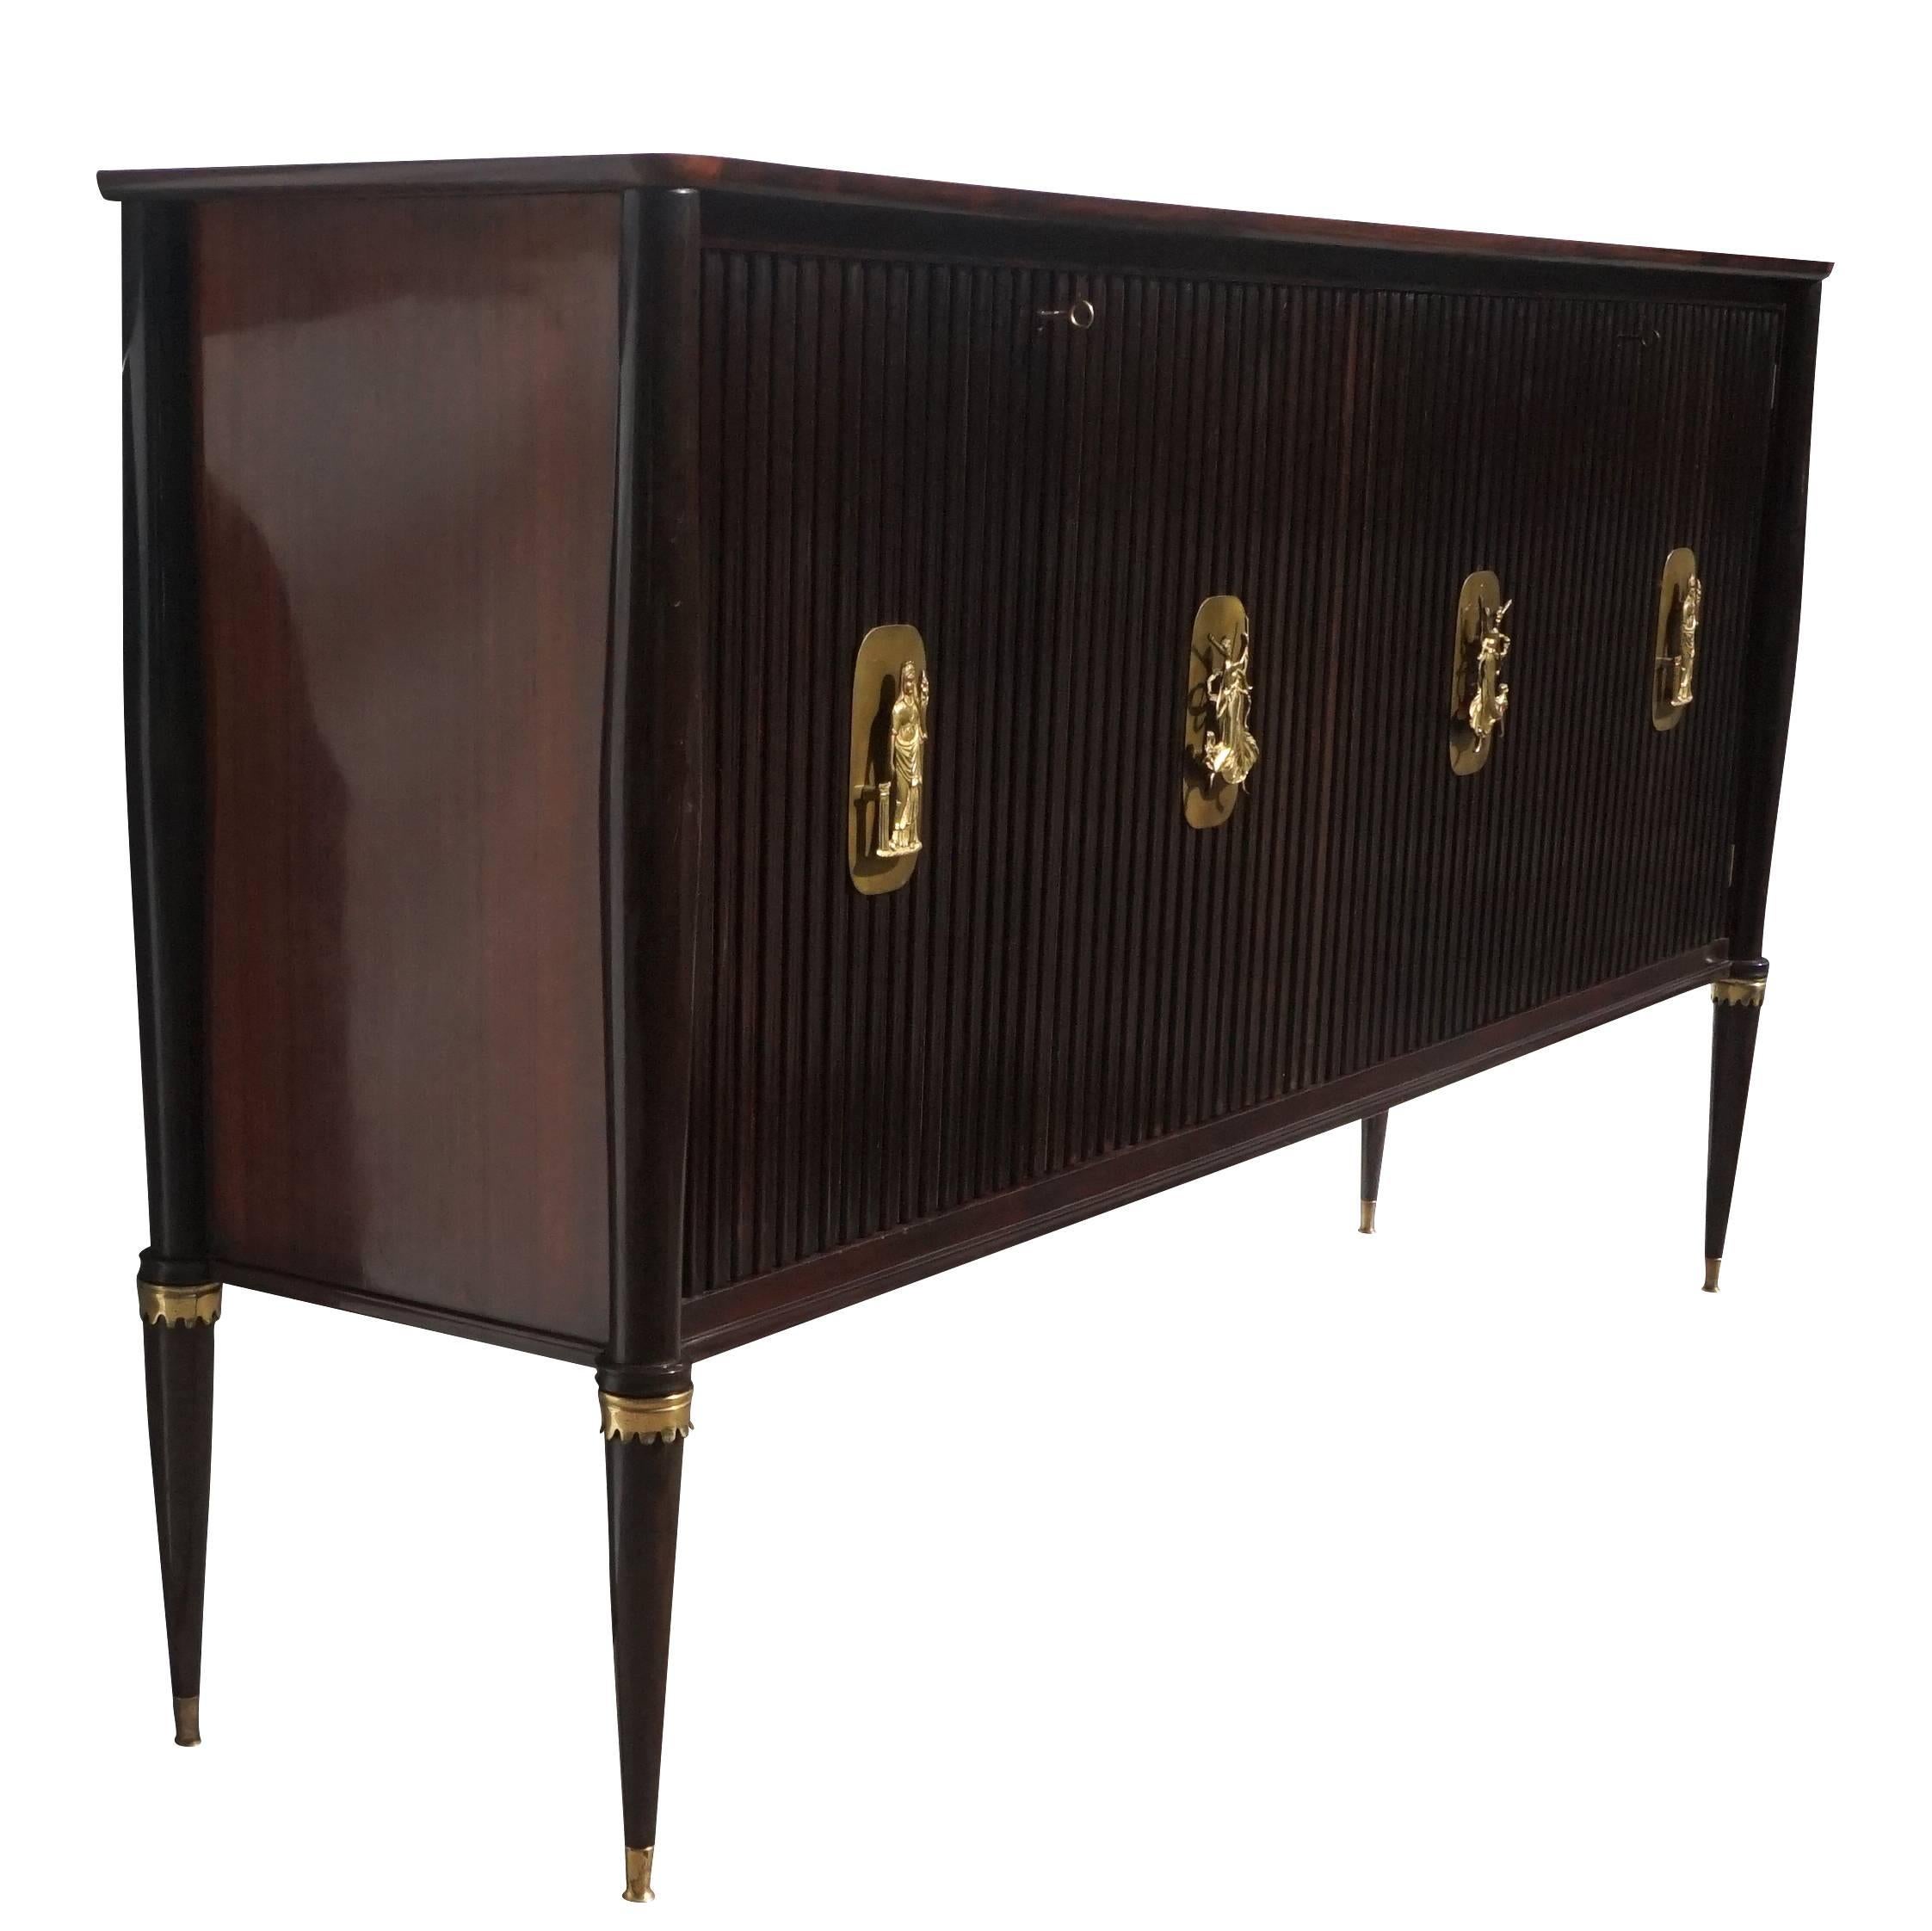 A very spectacular bar cabinet made of hand carved rosewood with sliding doors opening to a world of nightstands and different planets. The outside panels are rosewood with massive guilted bronze hardware. Designed by Osvaldo Borsani in good